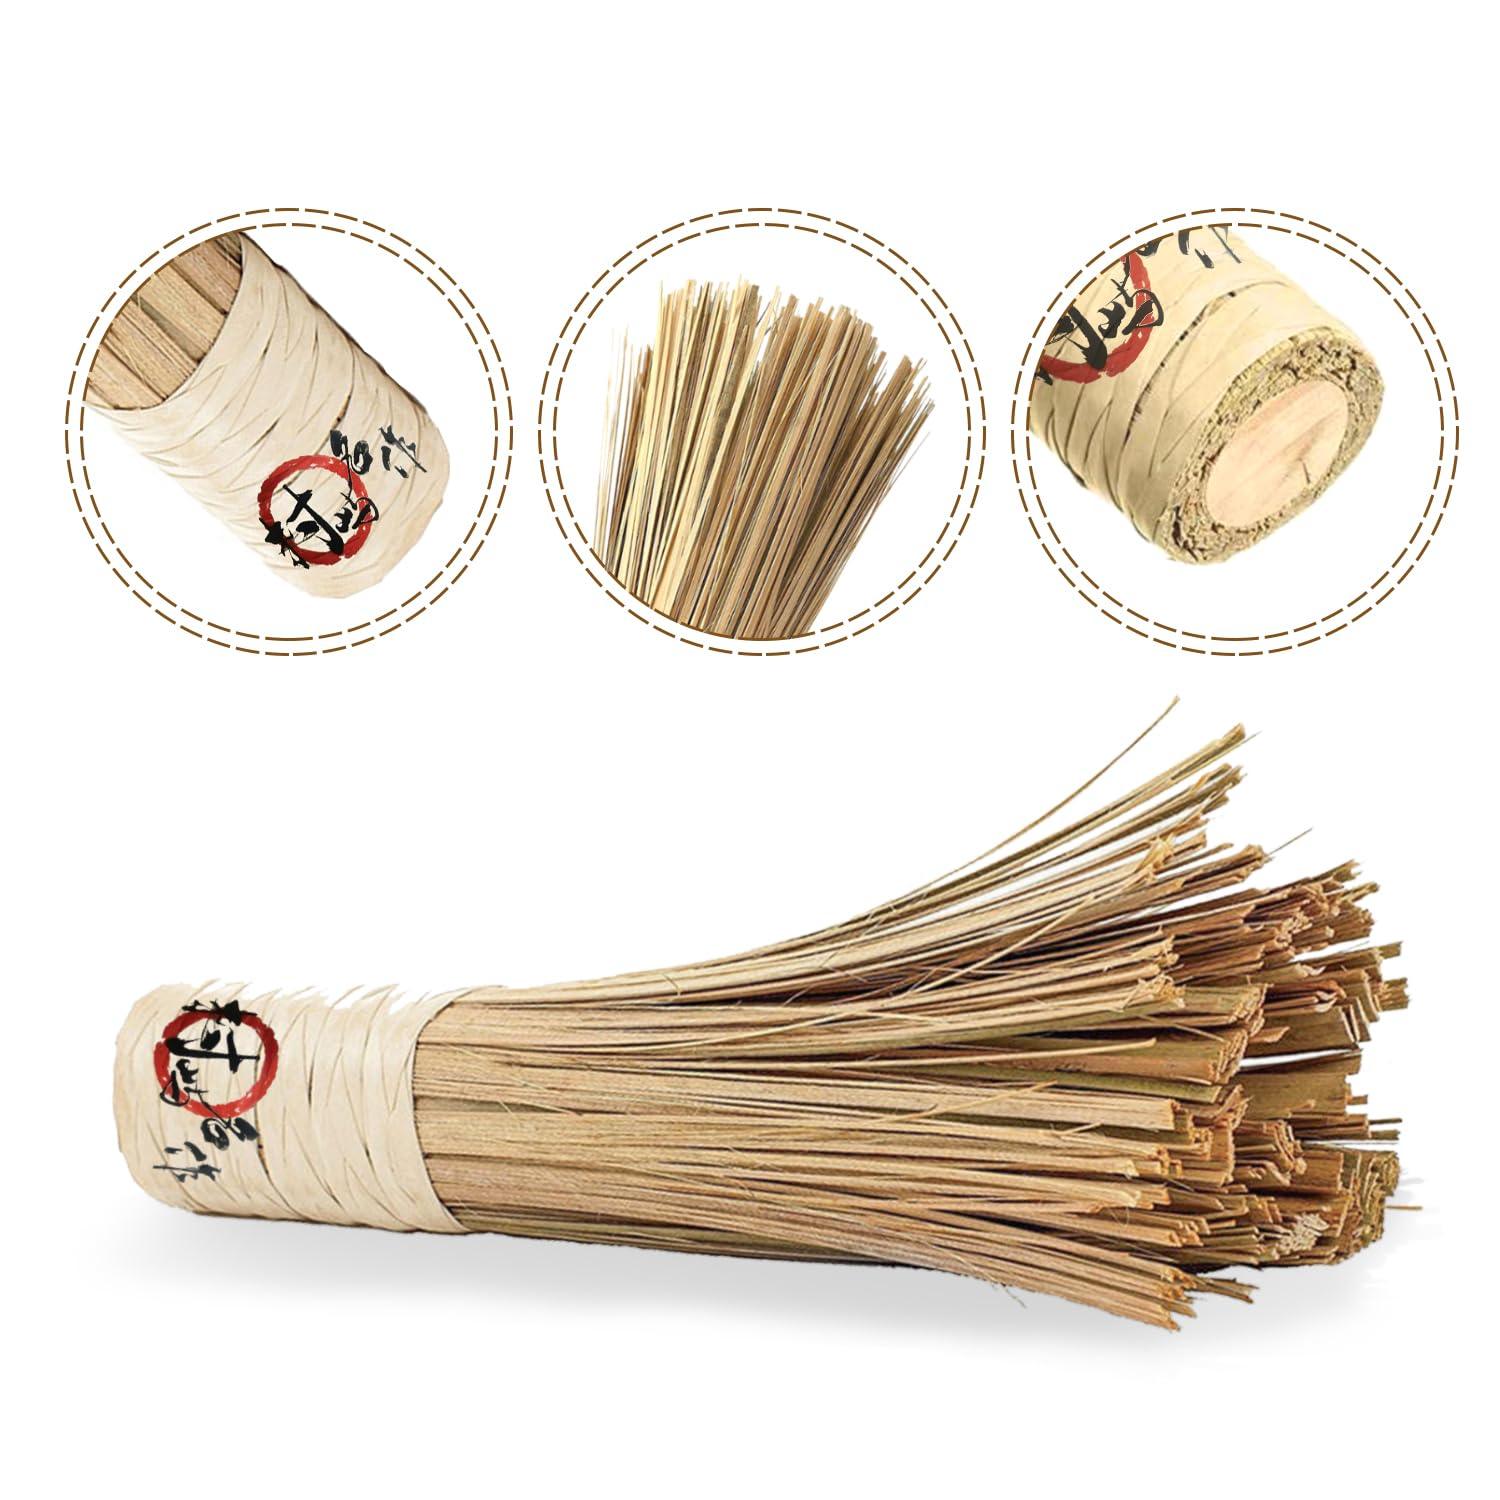 OTYFGHD 12-Inch Bamboo Wok Brush, Flat Brush, Kitchen Cleaning Brushes for Scrubbing and Cleaning Cooking Pots, Pans and Grilling Utensils (2 Pack) - CookCave